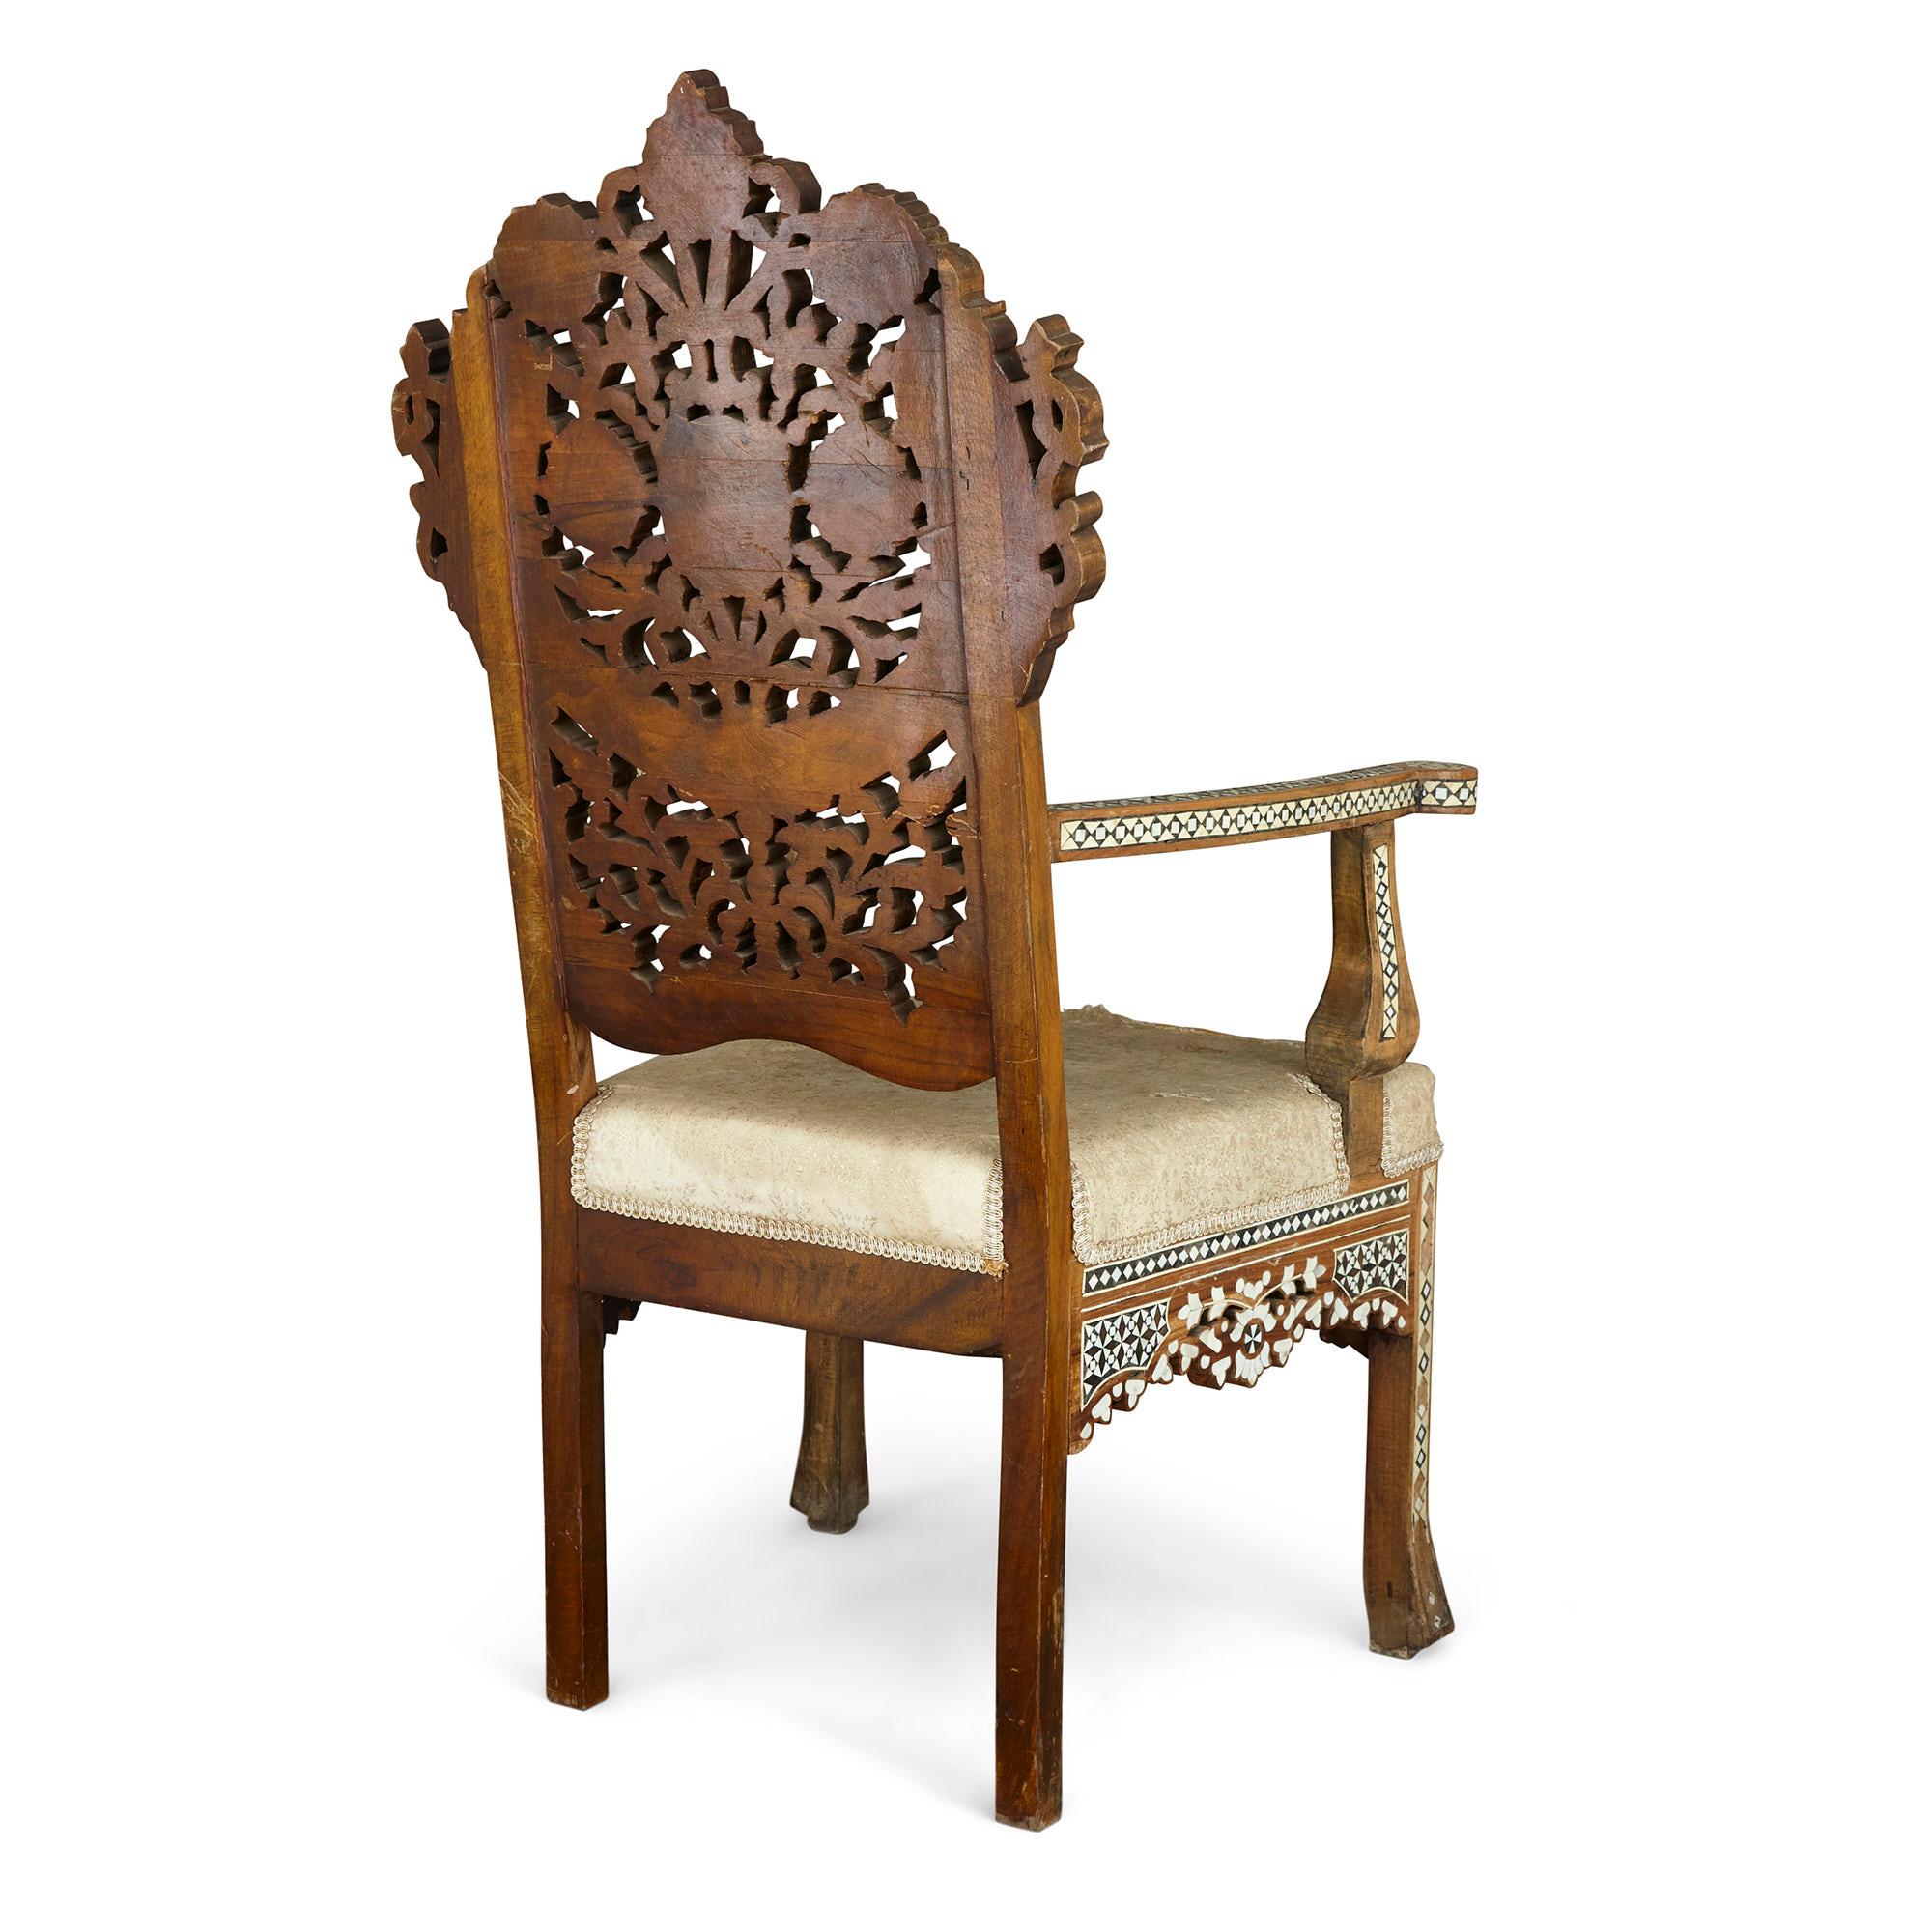 Ebonized Late 19th Century Syrian Chair with Arabesque Mother-of-Pearl and Abalone Inlays